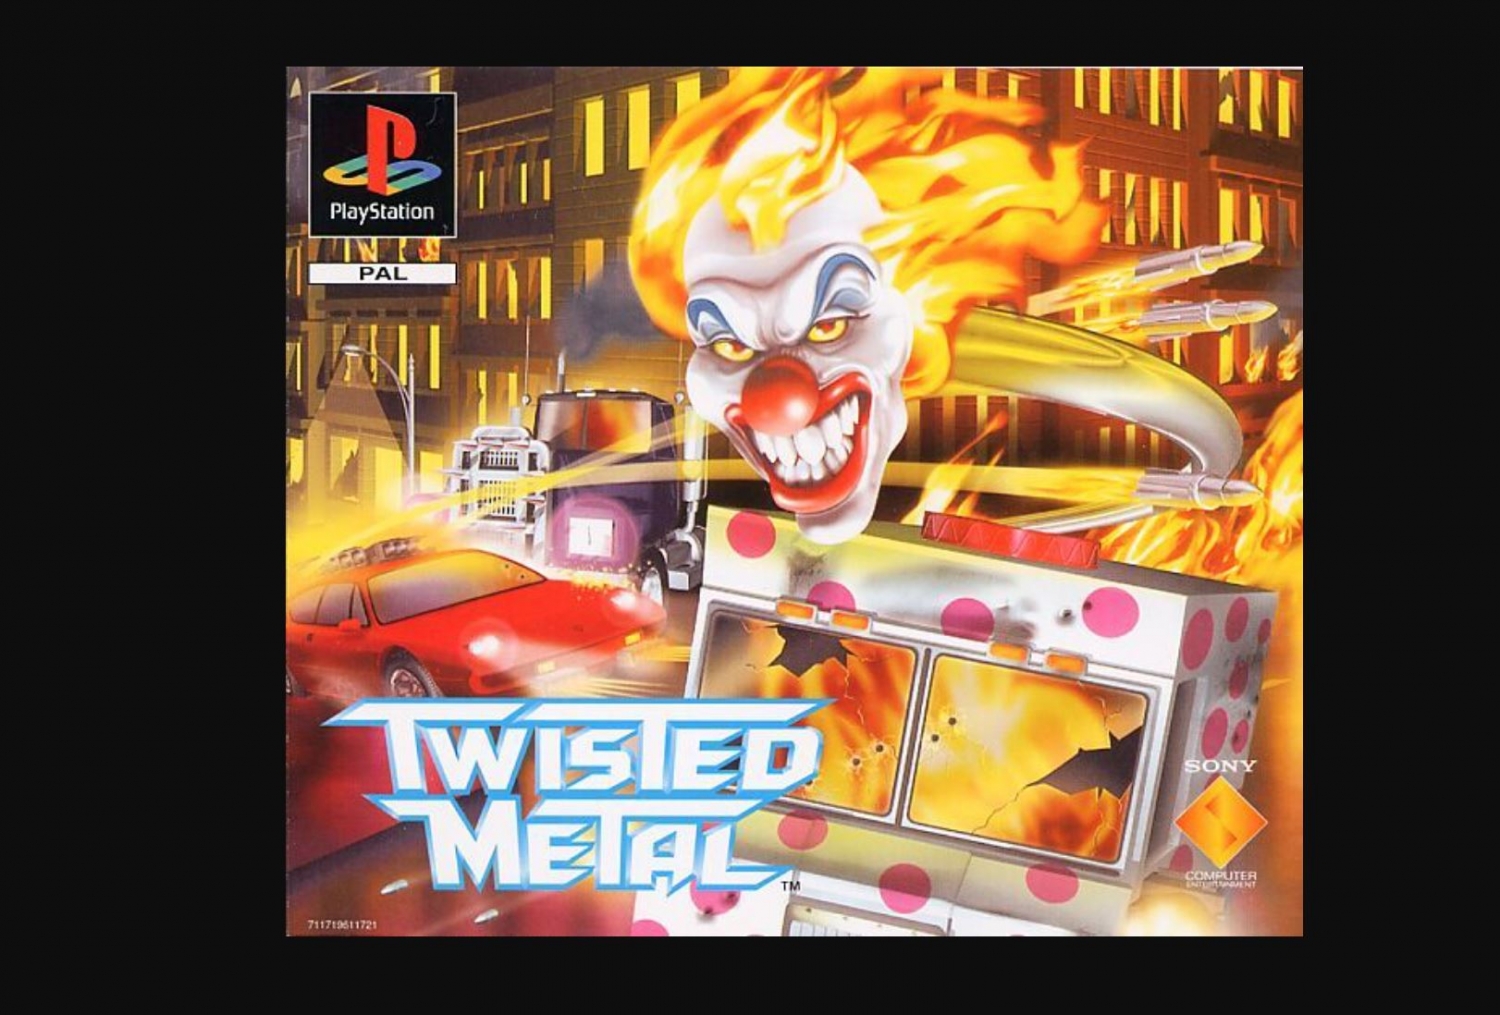 A twisted metal reboot or a hd collection with all the games? : r/psx